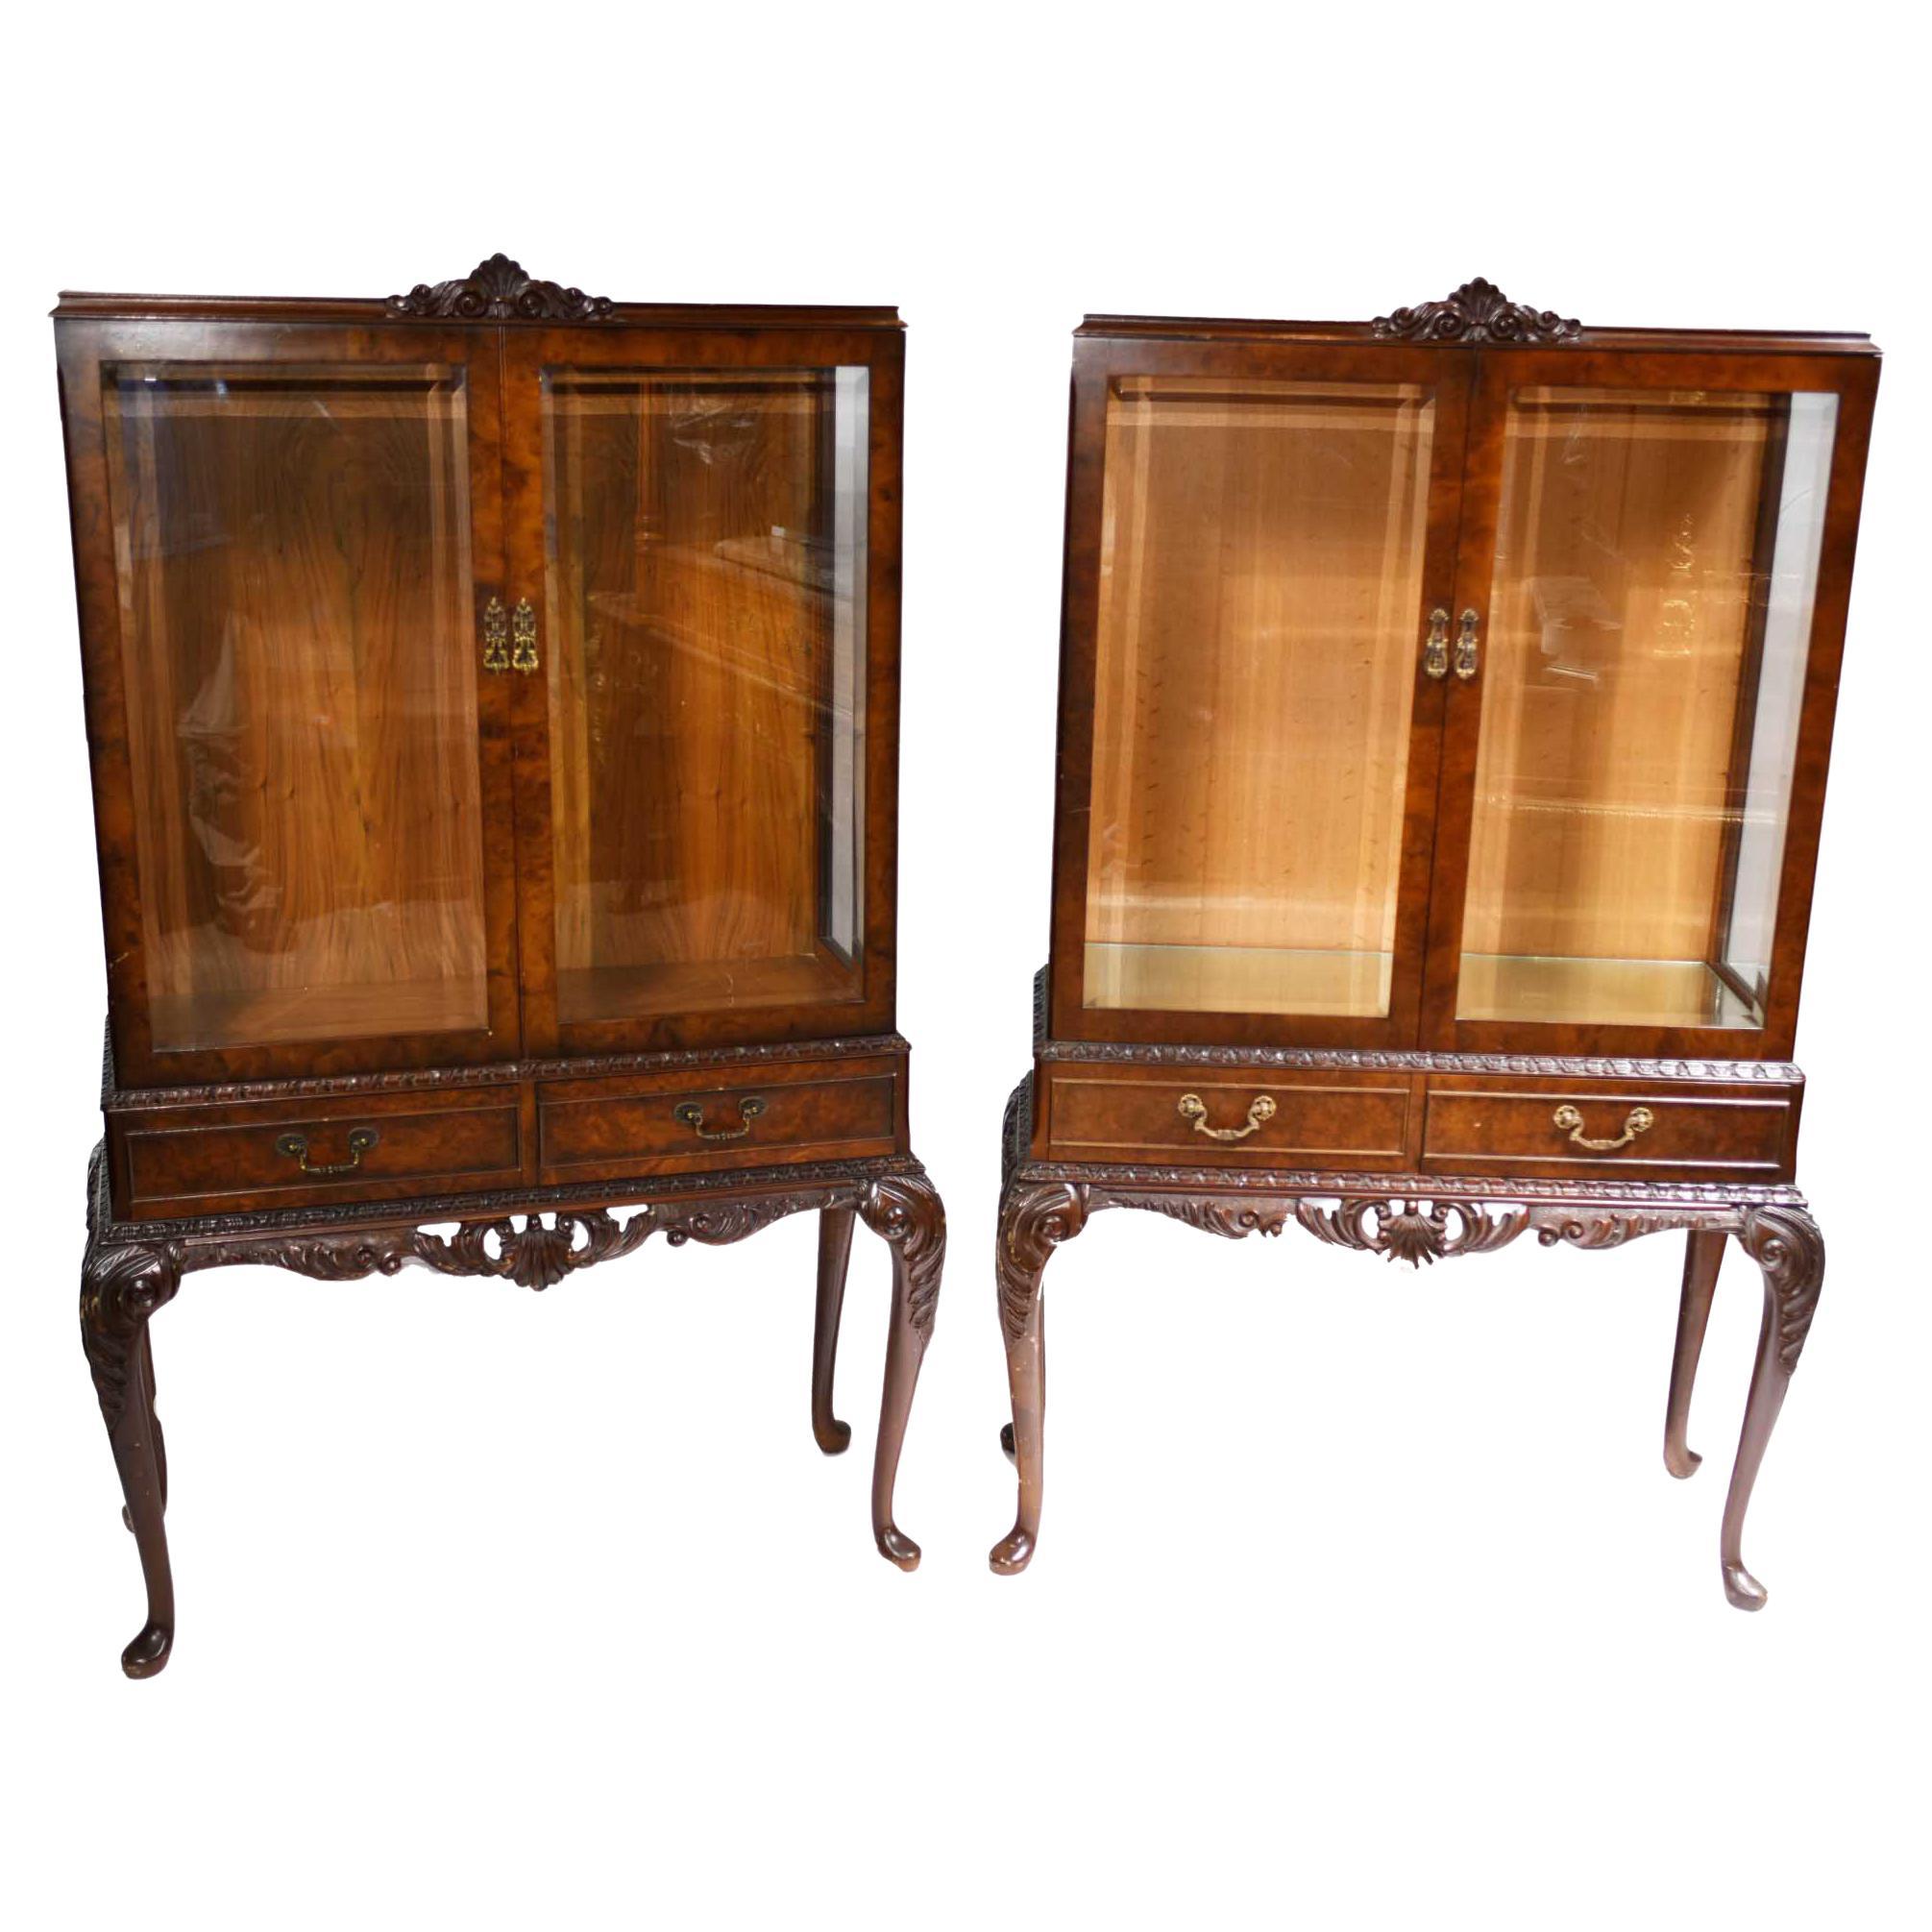 Pair Antique Display Cabinets, Walnut Victorian Bookcases